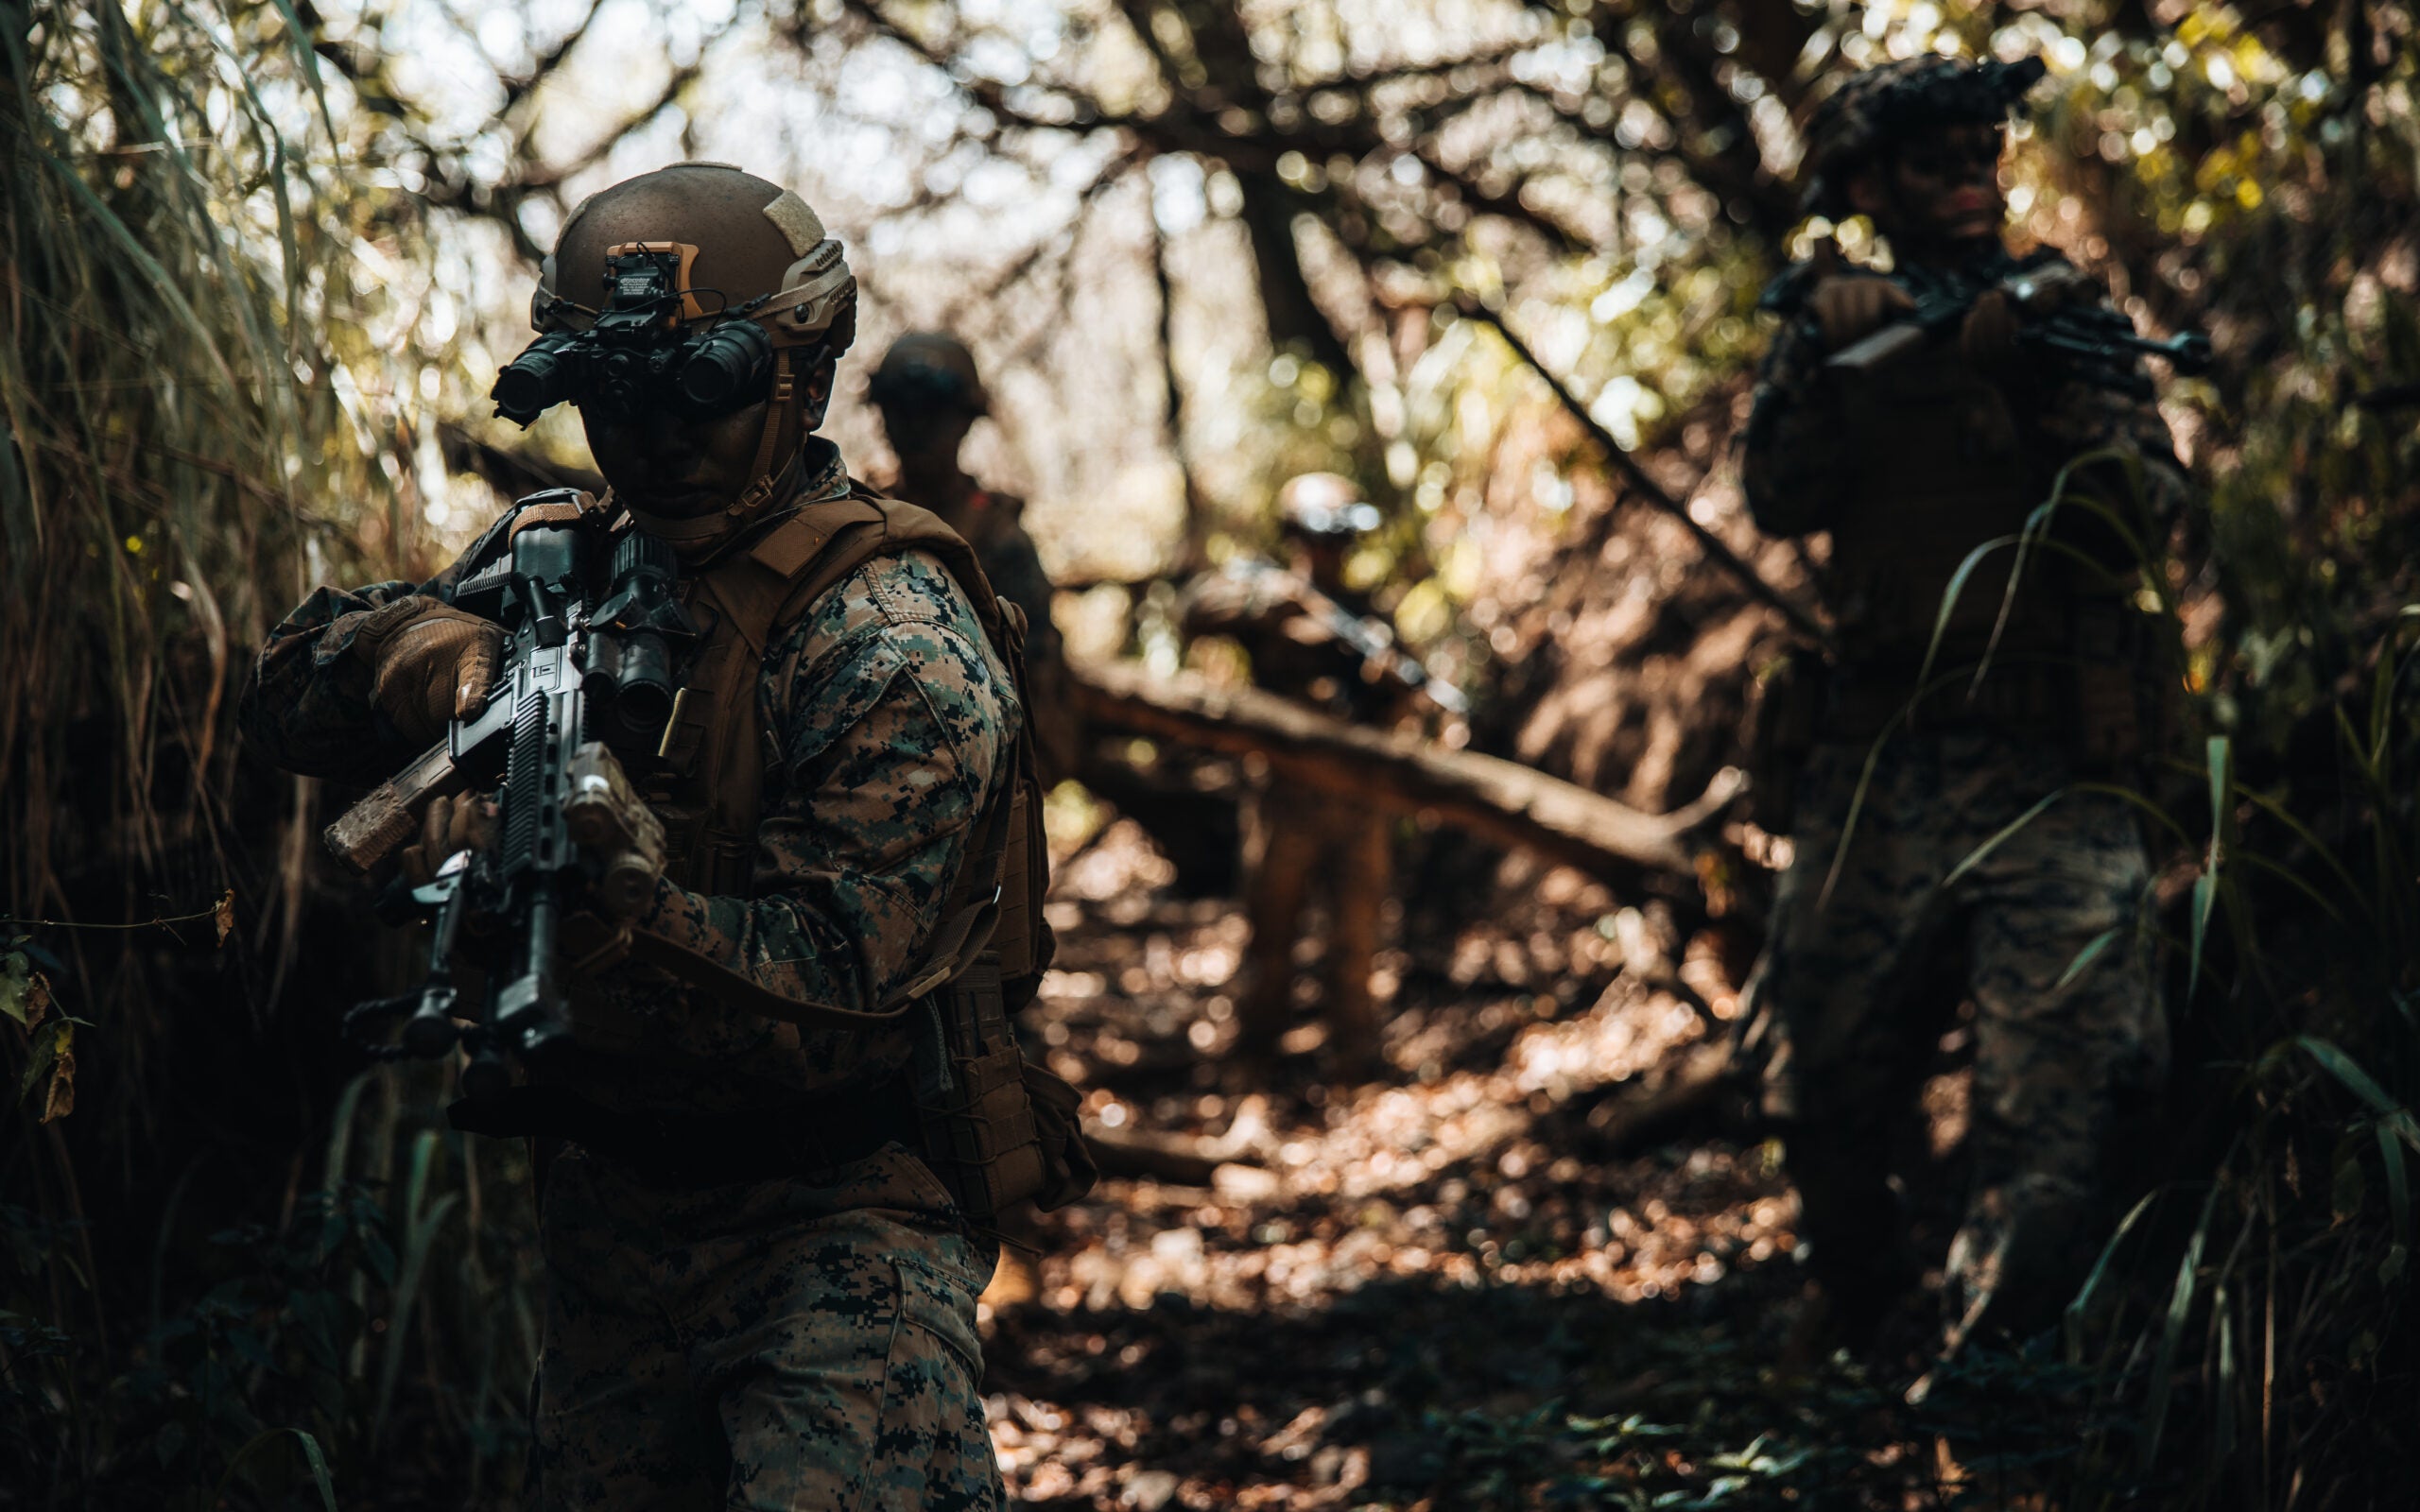 The Marine Corps’ new littoral combat team is changing the Marine rifle squad